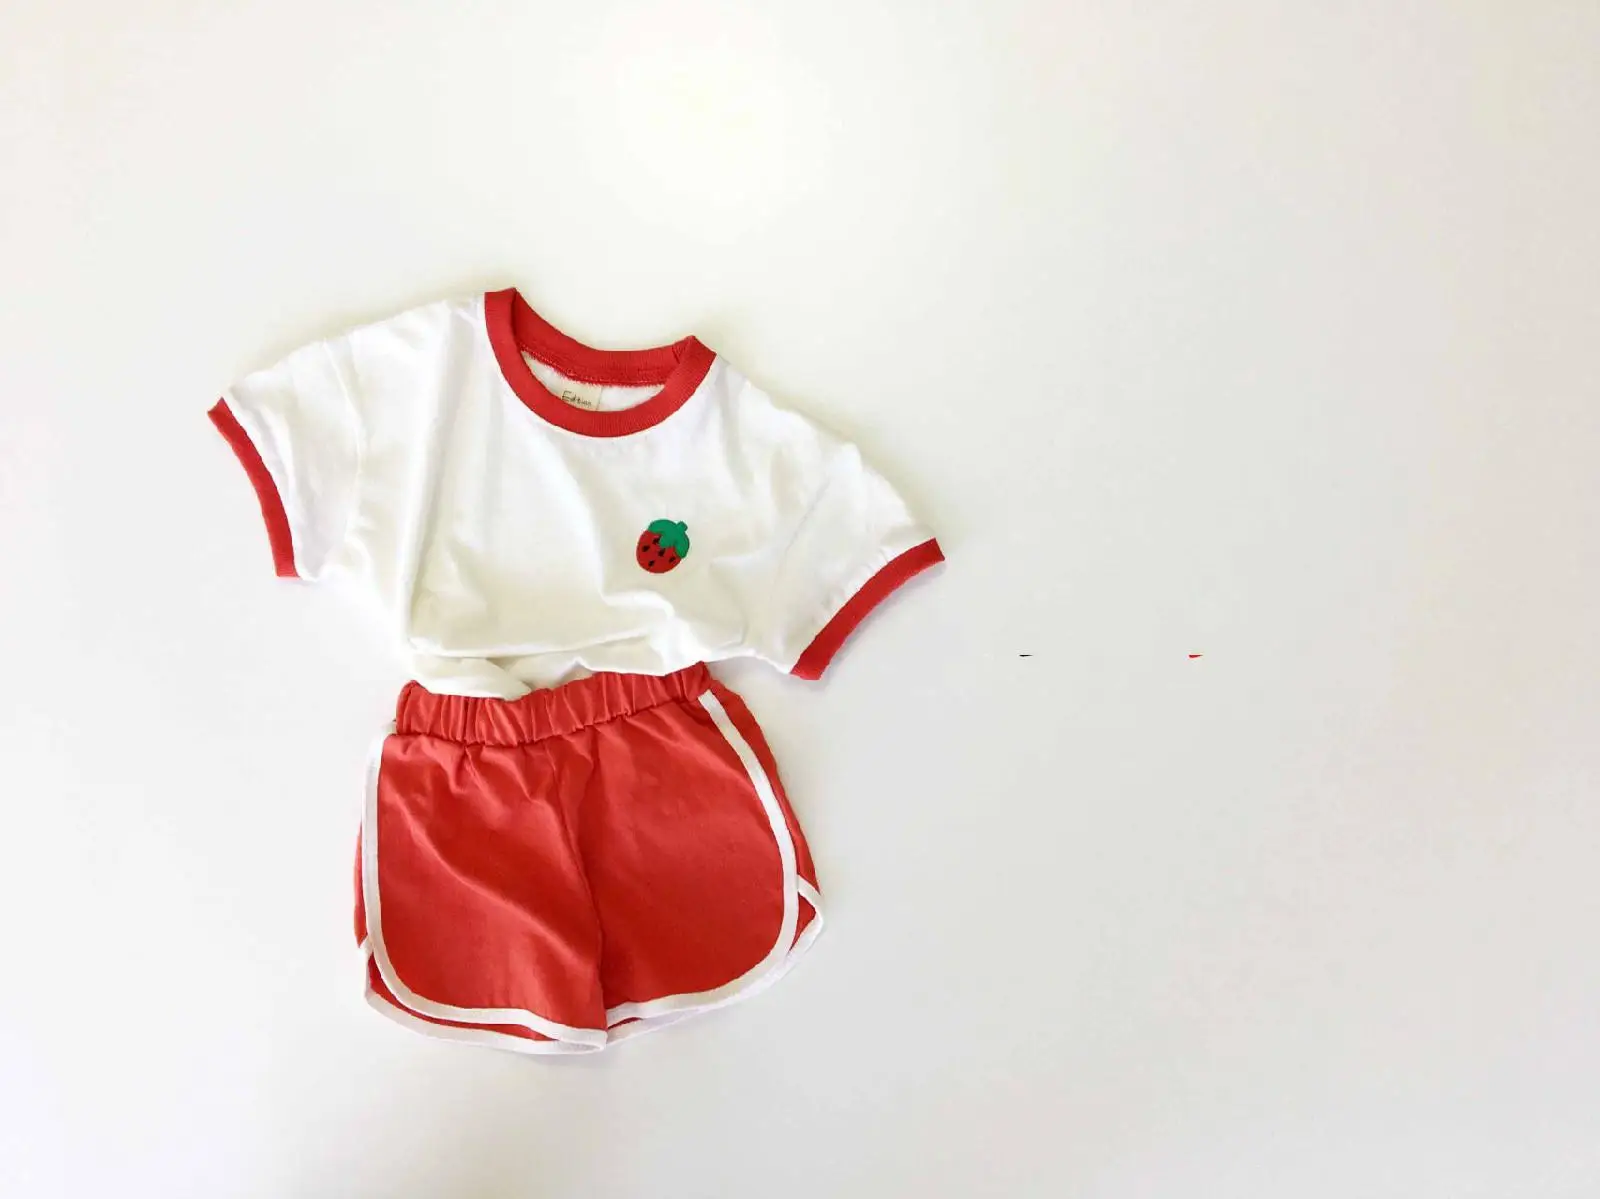 Clothing Sets for children 7654 Baby Clothing Set Korean Summer New Boy Suit Cute Fruit Pattern Baby Girl 2 Piece Suit Short Sleeve T Shirt+Shorts Outfits Clothing Sets for children Clothing Sets